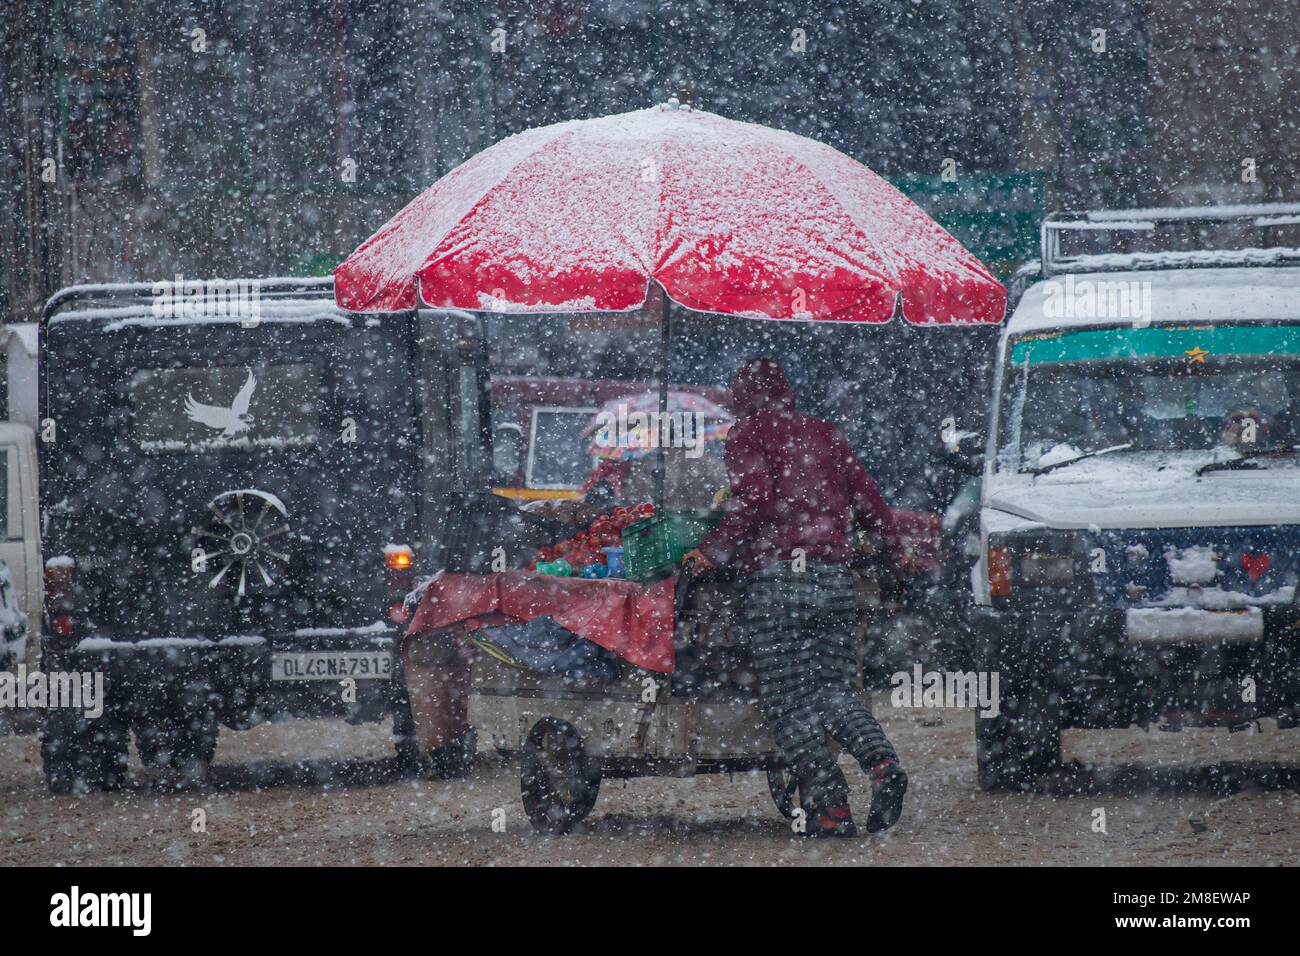 A street vendor pushes his hand cart amid ongoing heavy snowfall on the outskirts of Srinagar. At least two labourers killed on Thursday after an avalanche hits high-altitude area in central Kashmir's Sonamarg. Most parts of Kashmir received fresh snowfall that leading to the closure of Kashmir capital's main highway that connects disputed region with the rest of India. Meanwhile airport authorities suspended all flight operations till further notice due to continuous snowfall and low visibility. (Photo by Faisal Bashir/SOPA Images/Sipa USA) Stock Photo